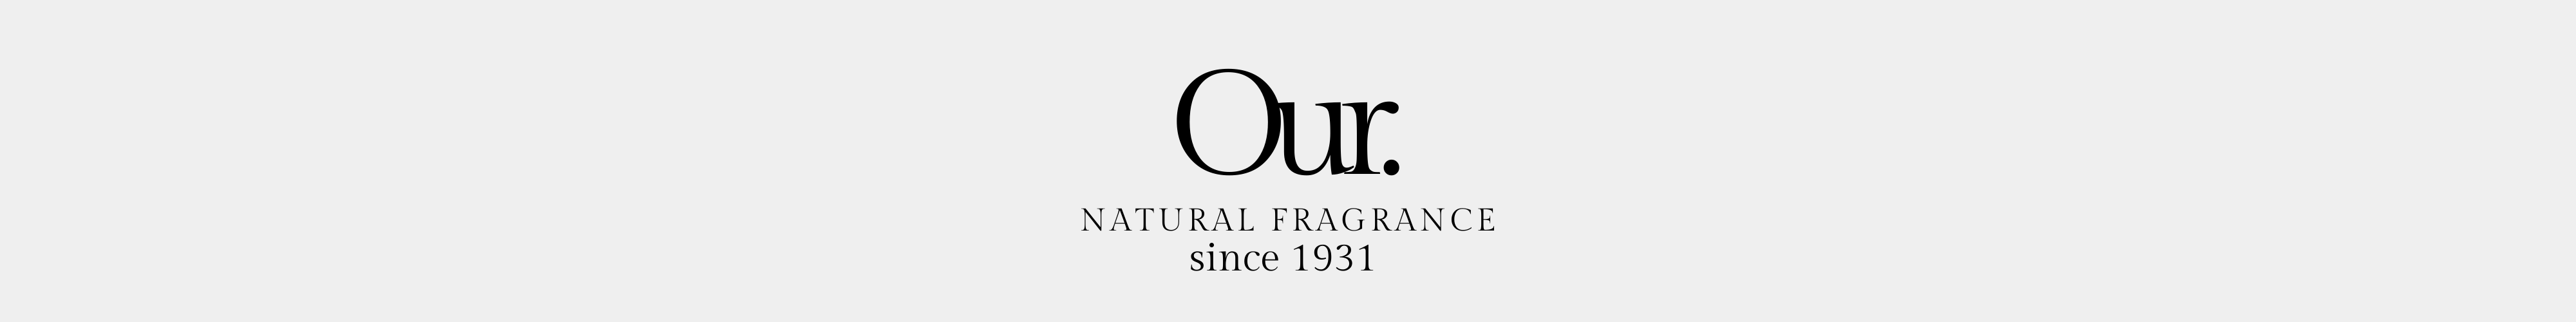 Our. Fragrance